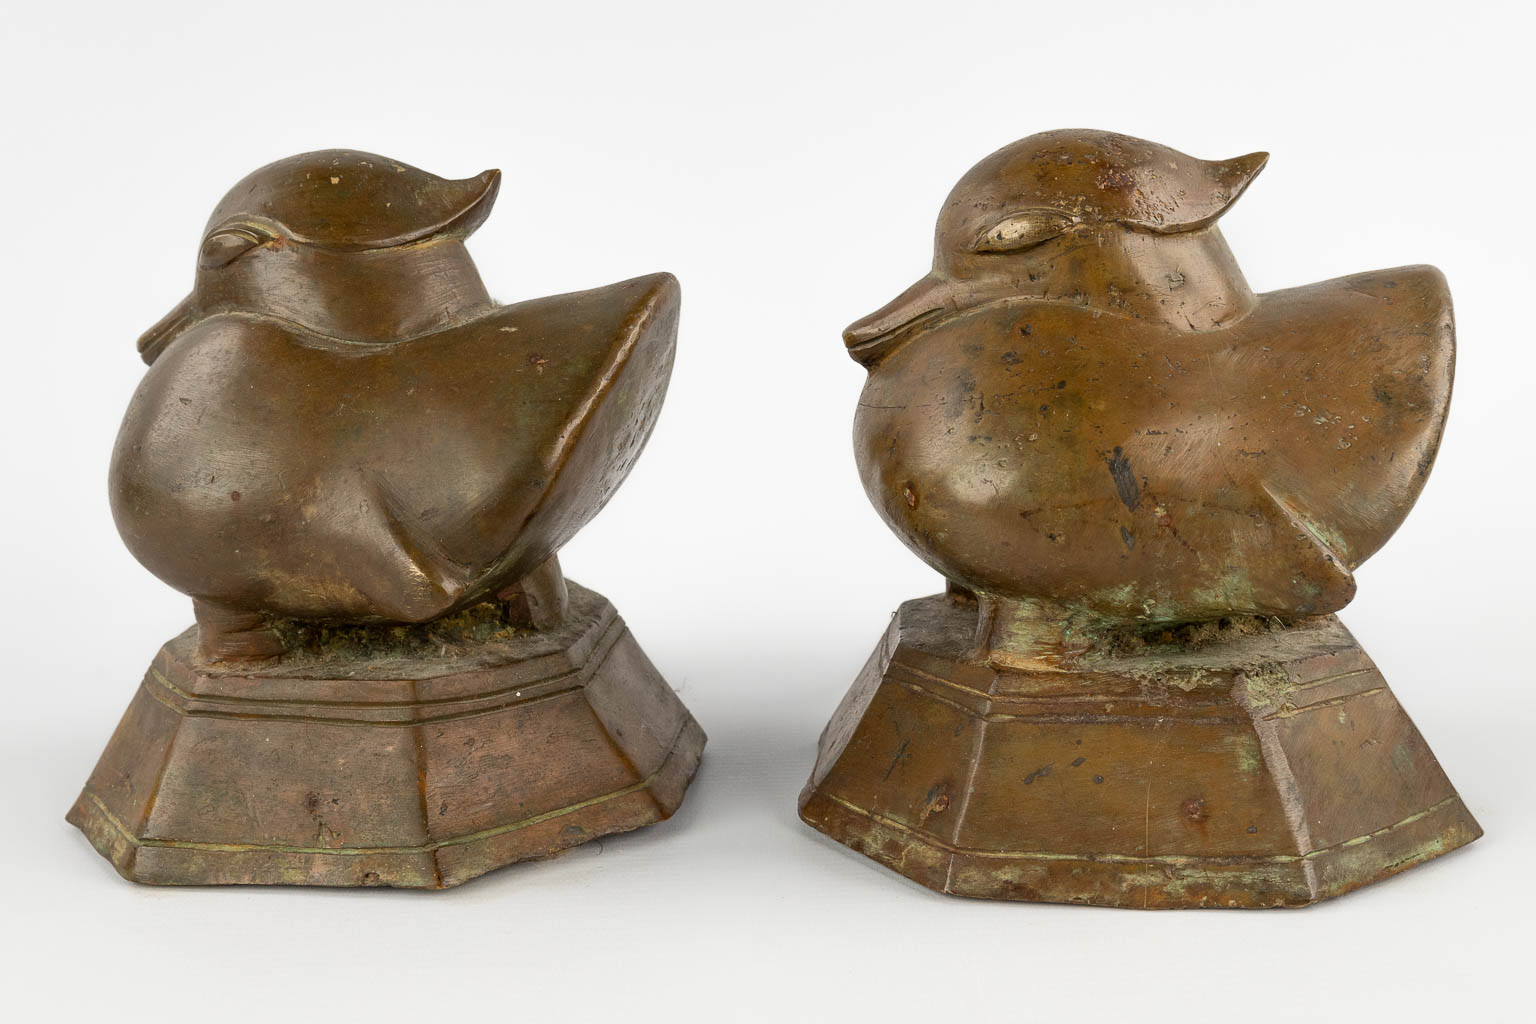 A pair of Oriental weights, decorated wtih ducks. Bronze. (D:15 x W:17 x H:18 cm)